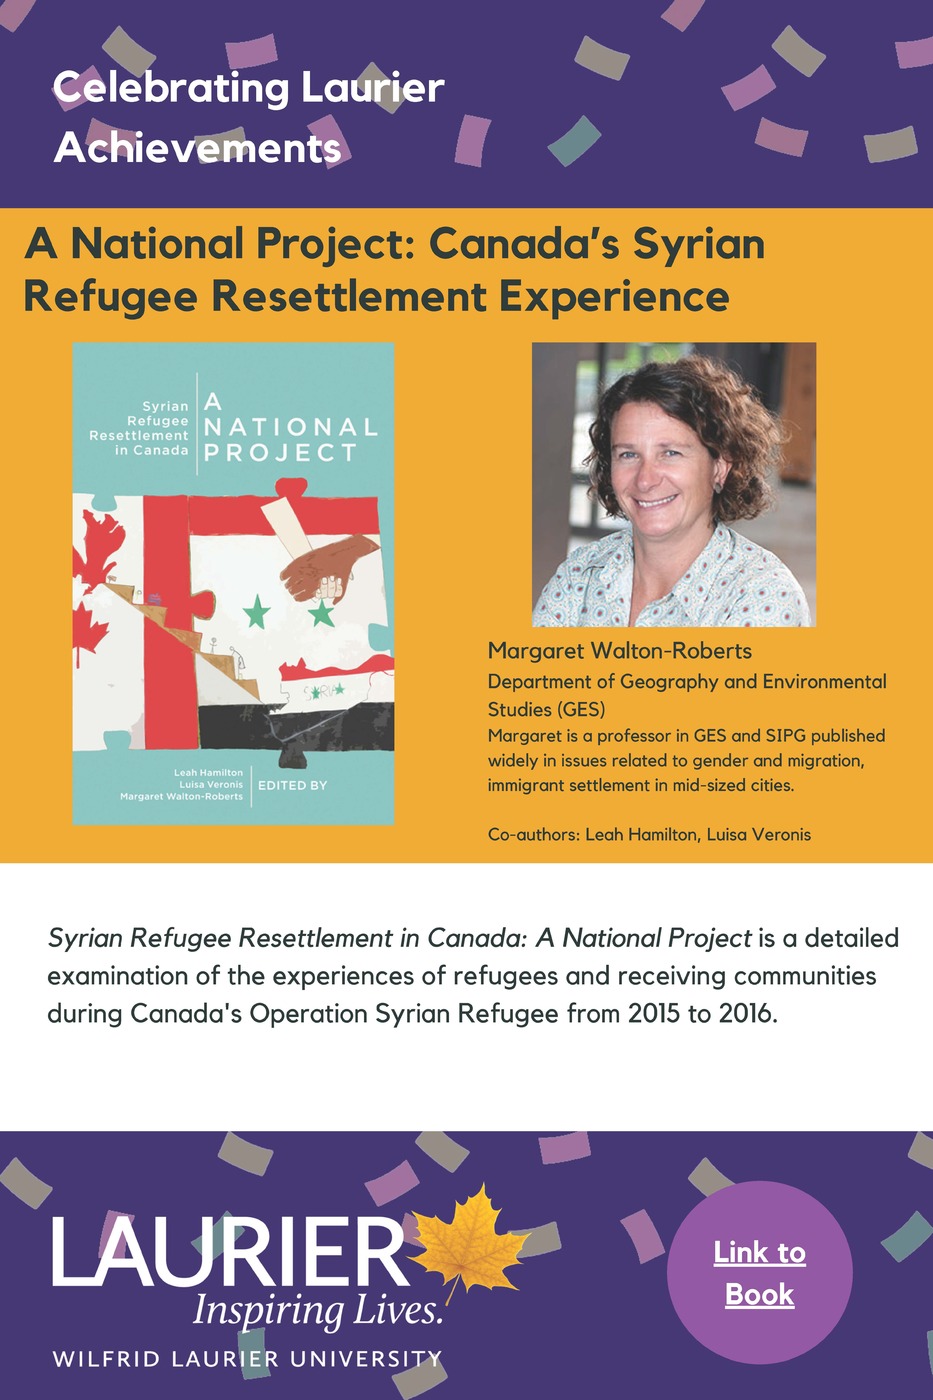 A National Project: Canada’s Syrian Refugee Resettlement Experience promtional poster for the Celebrating Laurier Achievements program with a headshot of one of the authors, Margaret Walton-Roberts.